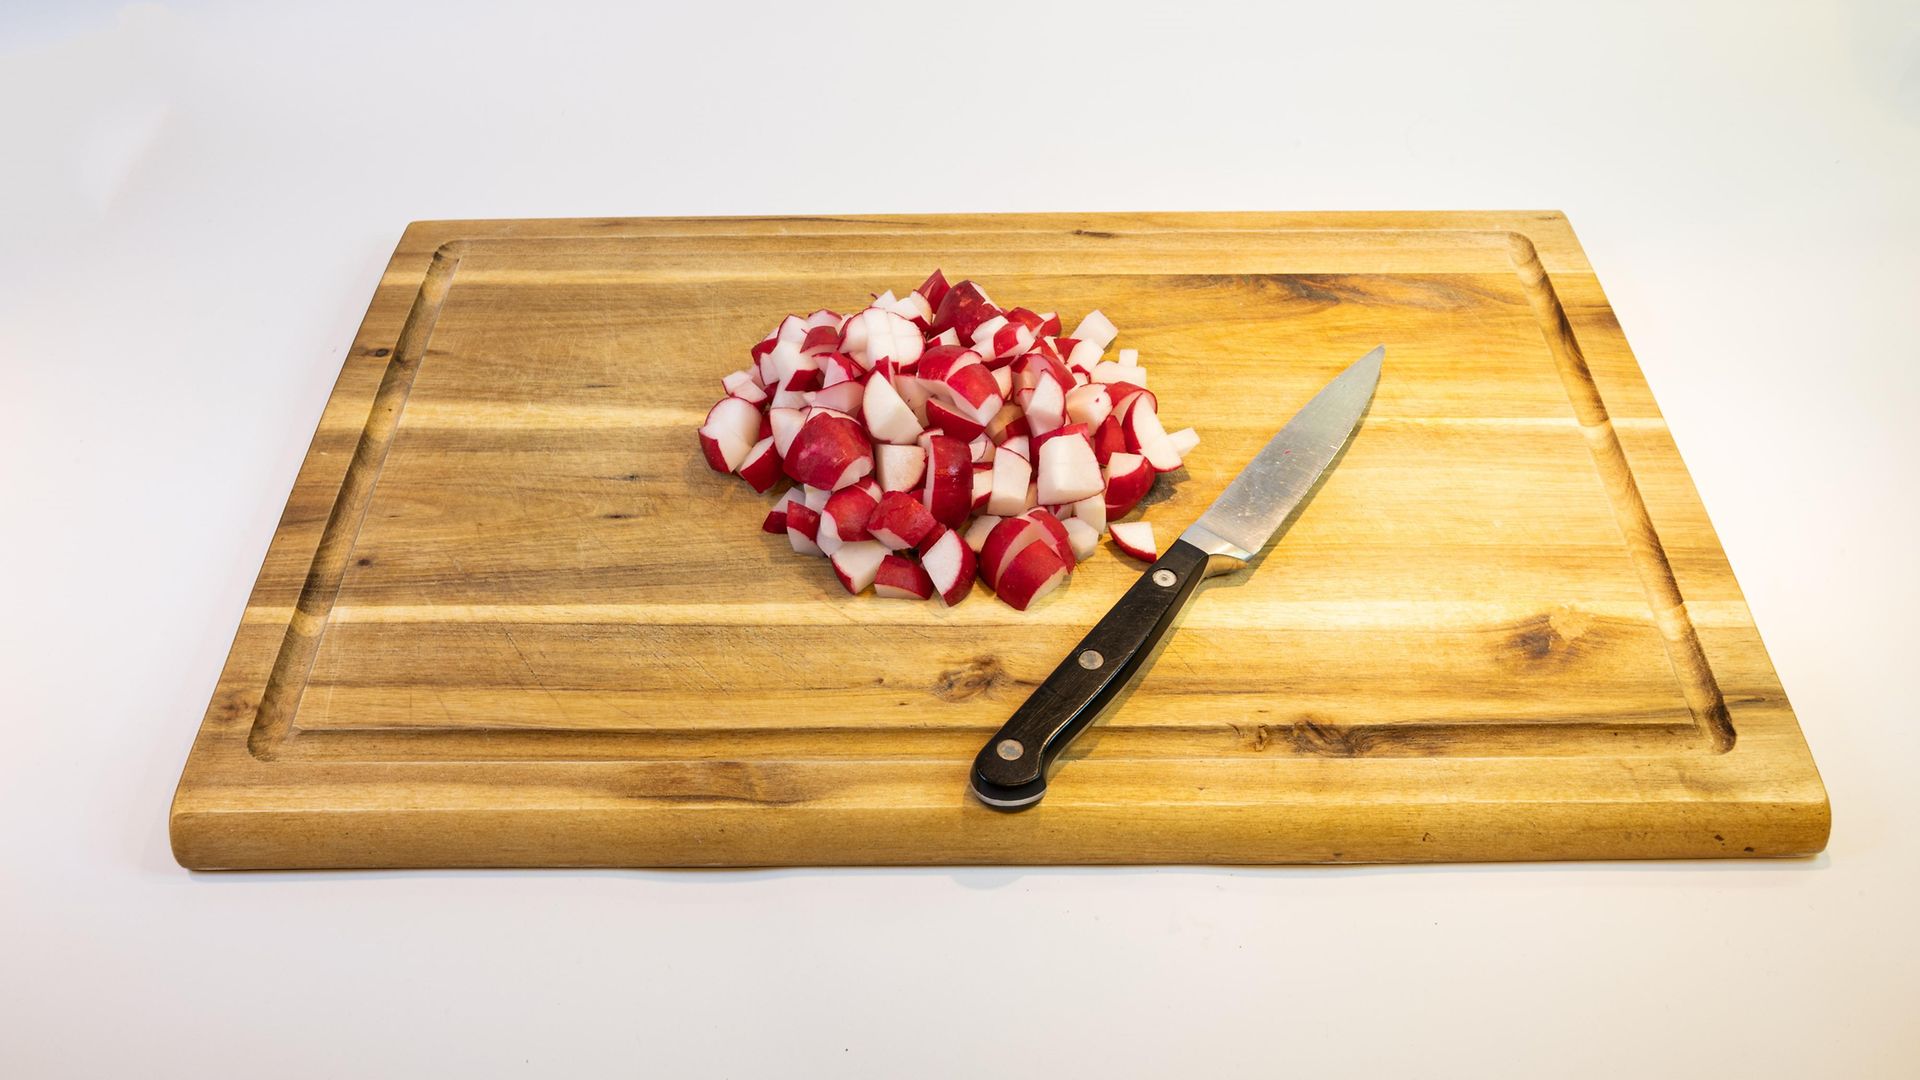 radish cut in small pieces on wooden cutting board